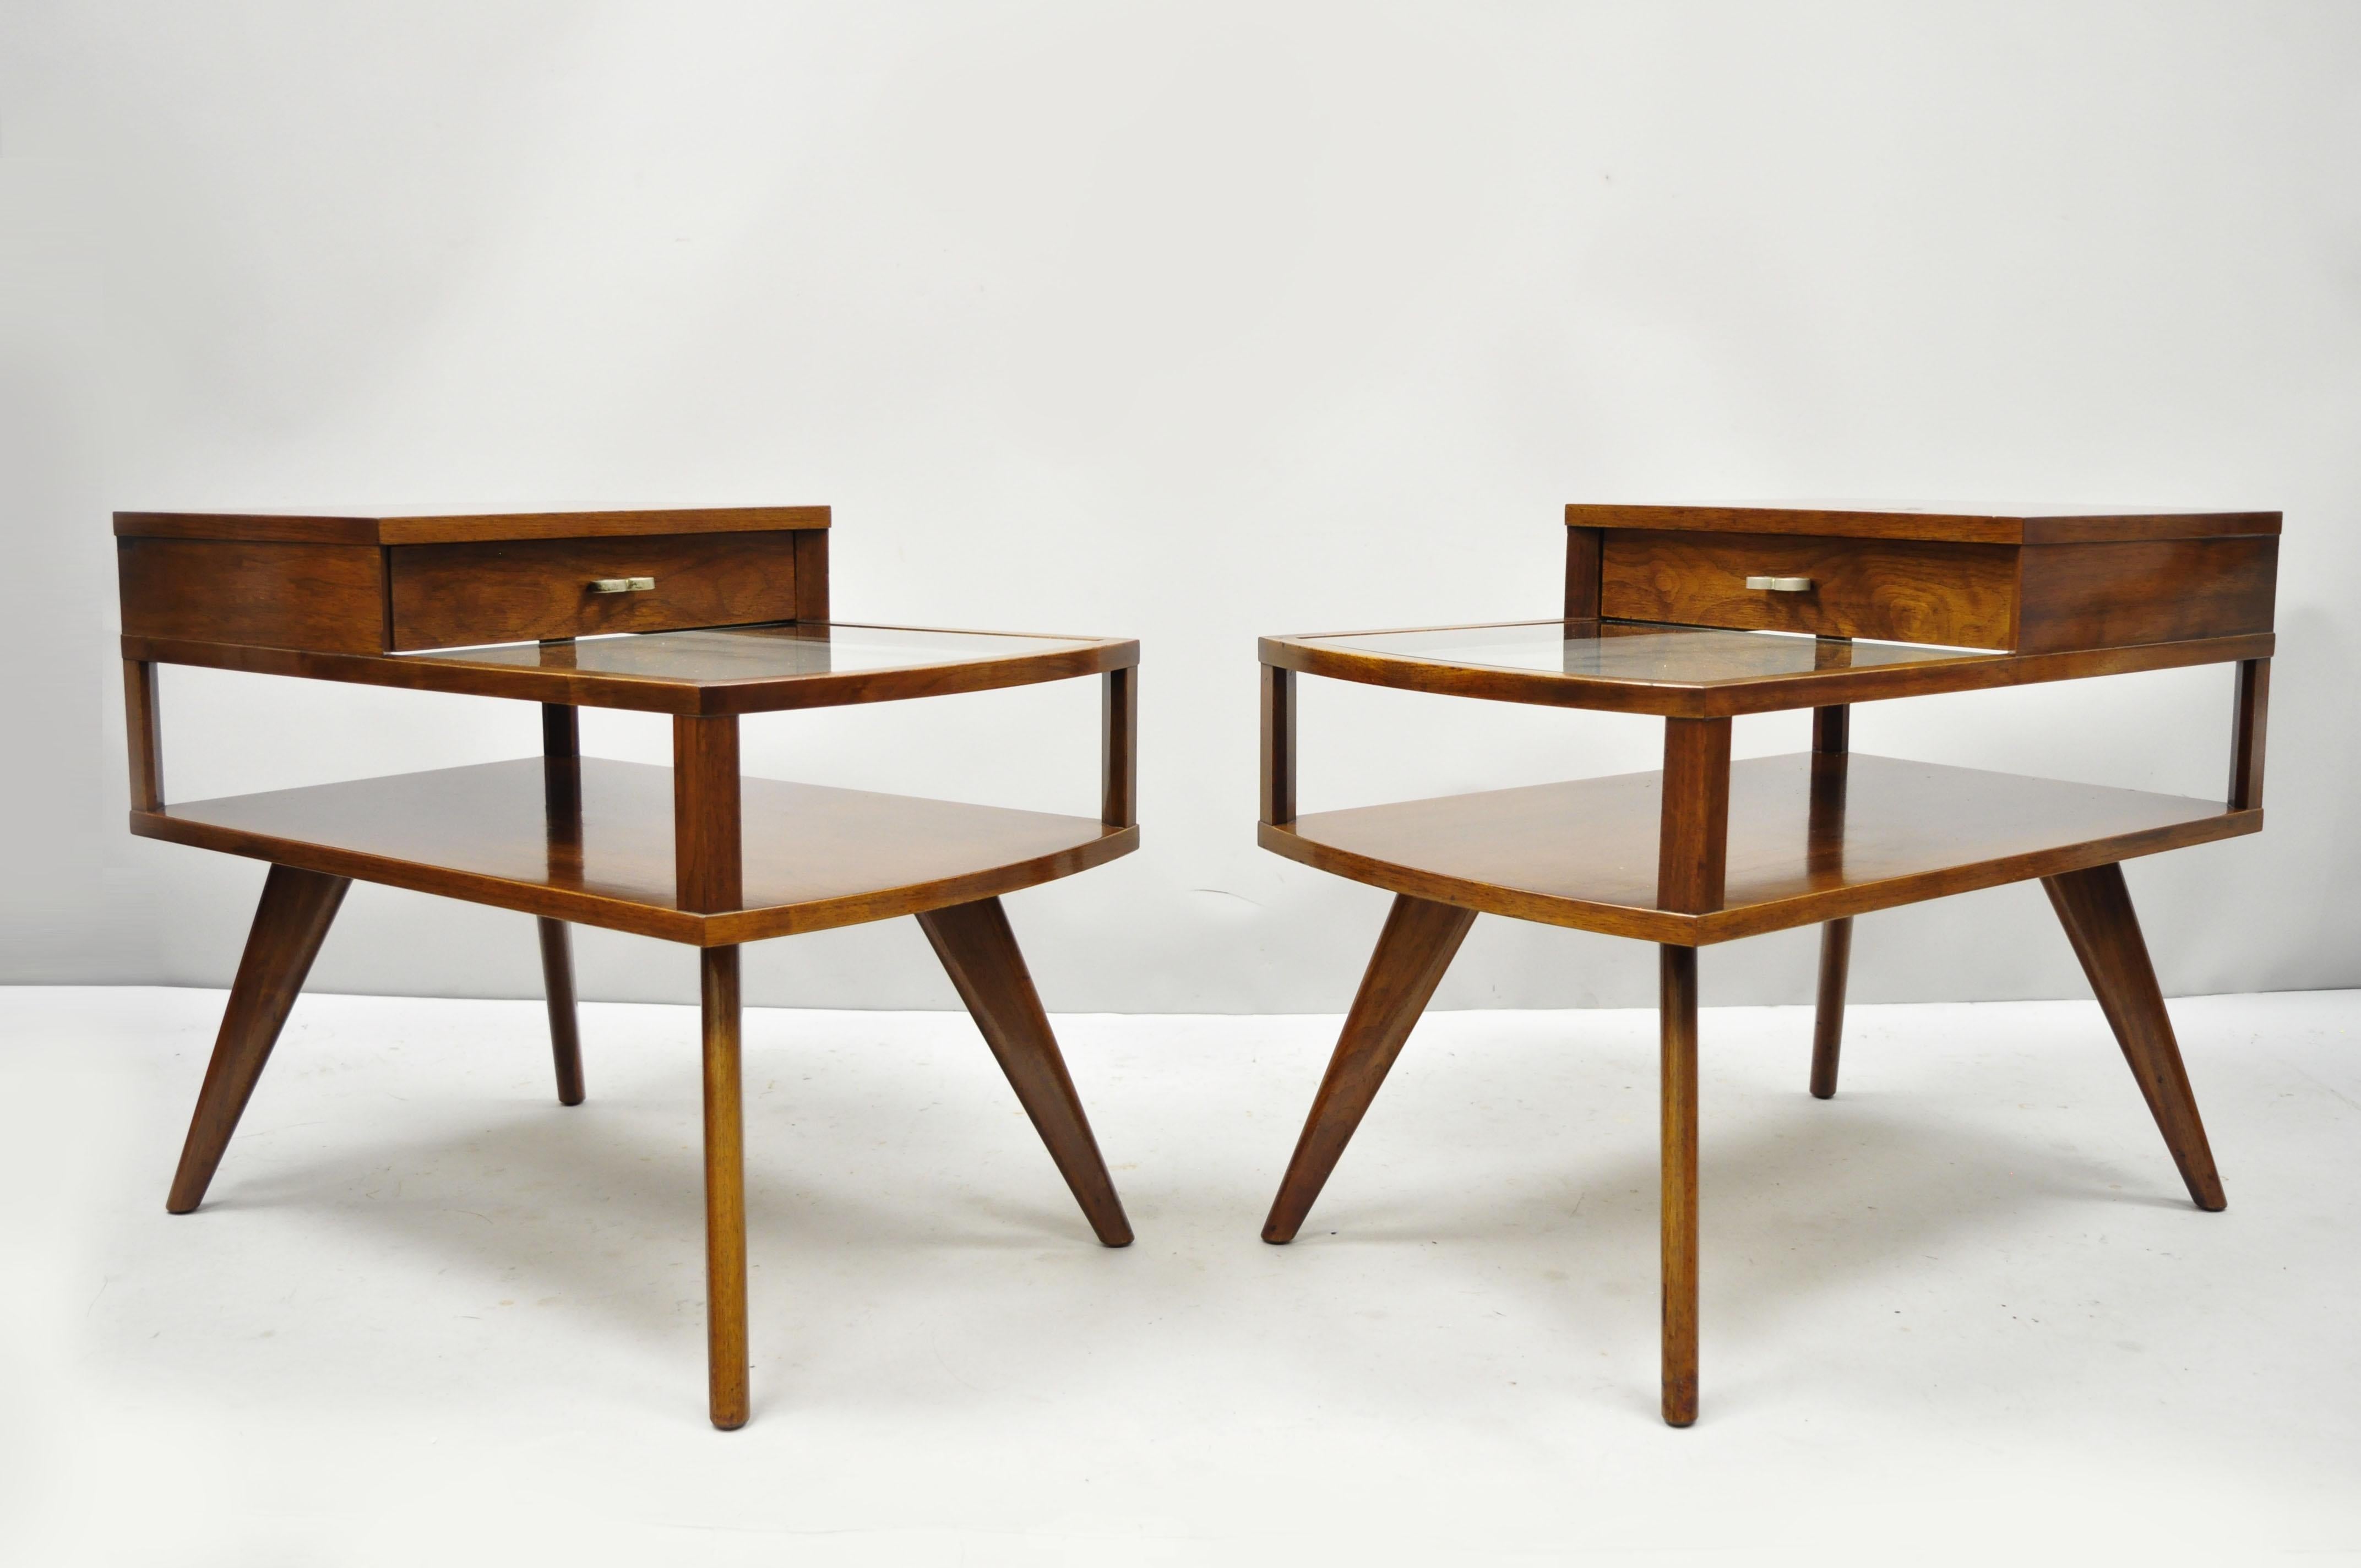 Vintage midcentury Danish modern walnut and glass two-tier step end tables. Item features 